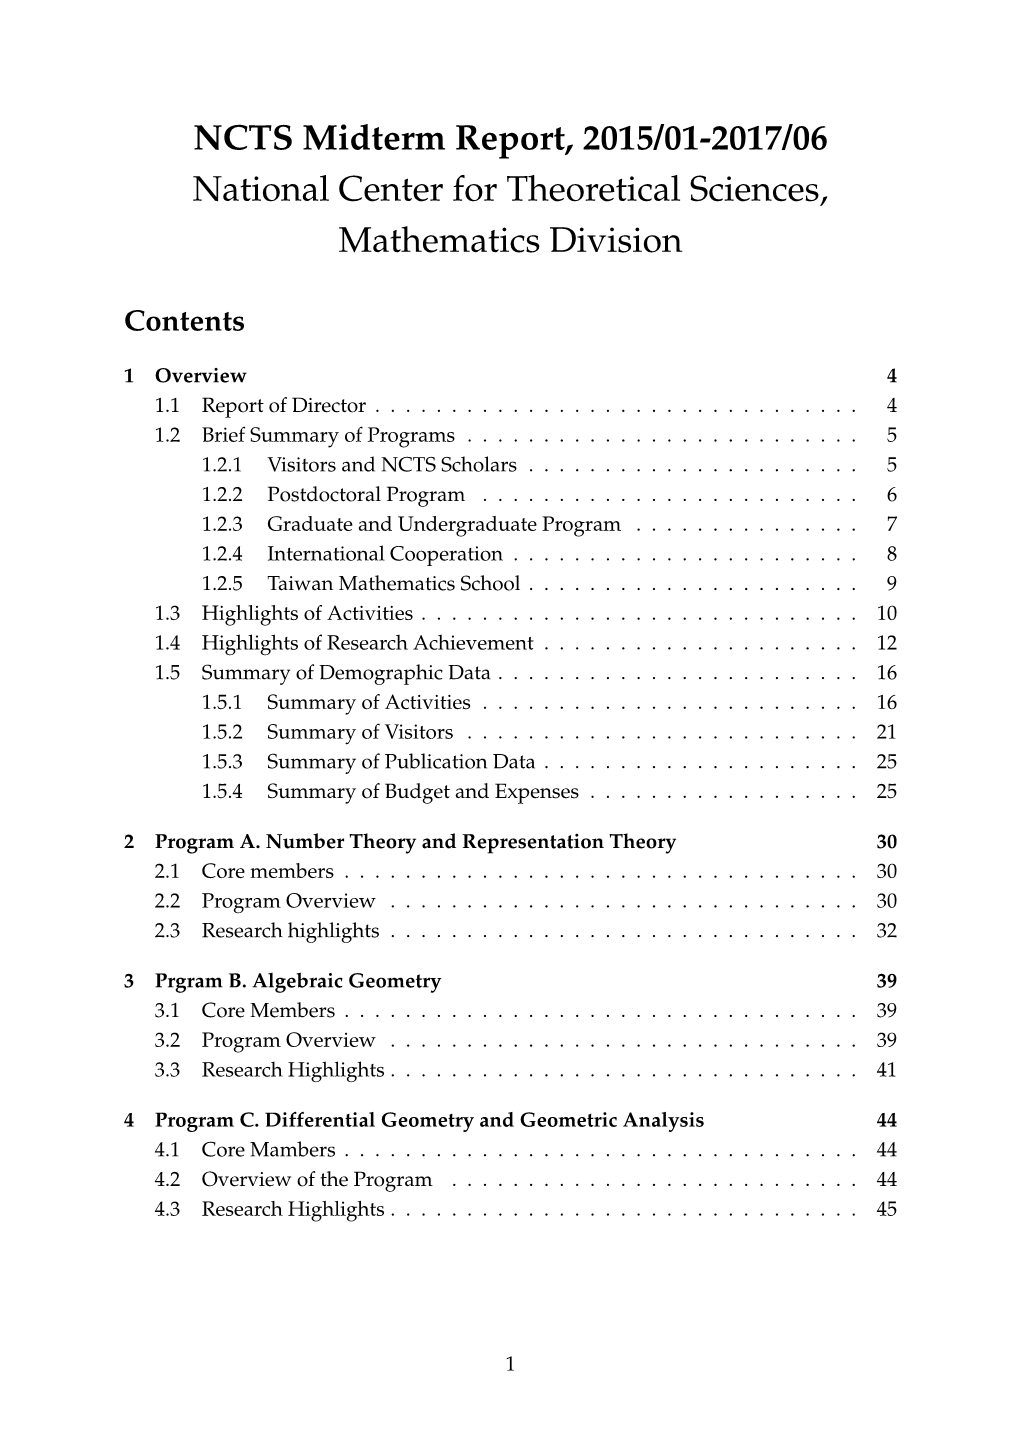 NCTS Midterm Report, 2015/01-2017/06 National Center for Theoretical Sciences, Mathematics Division